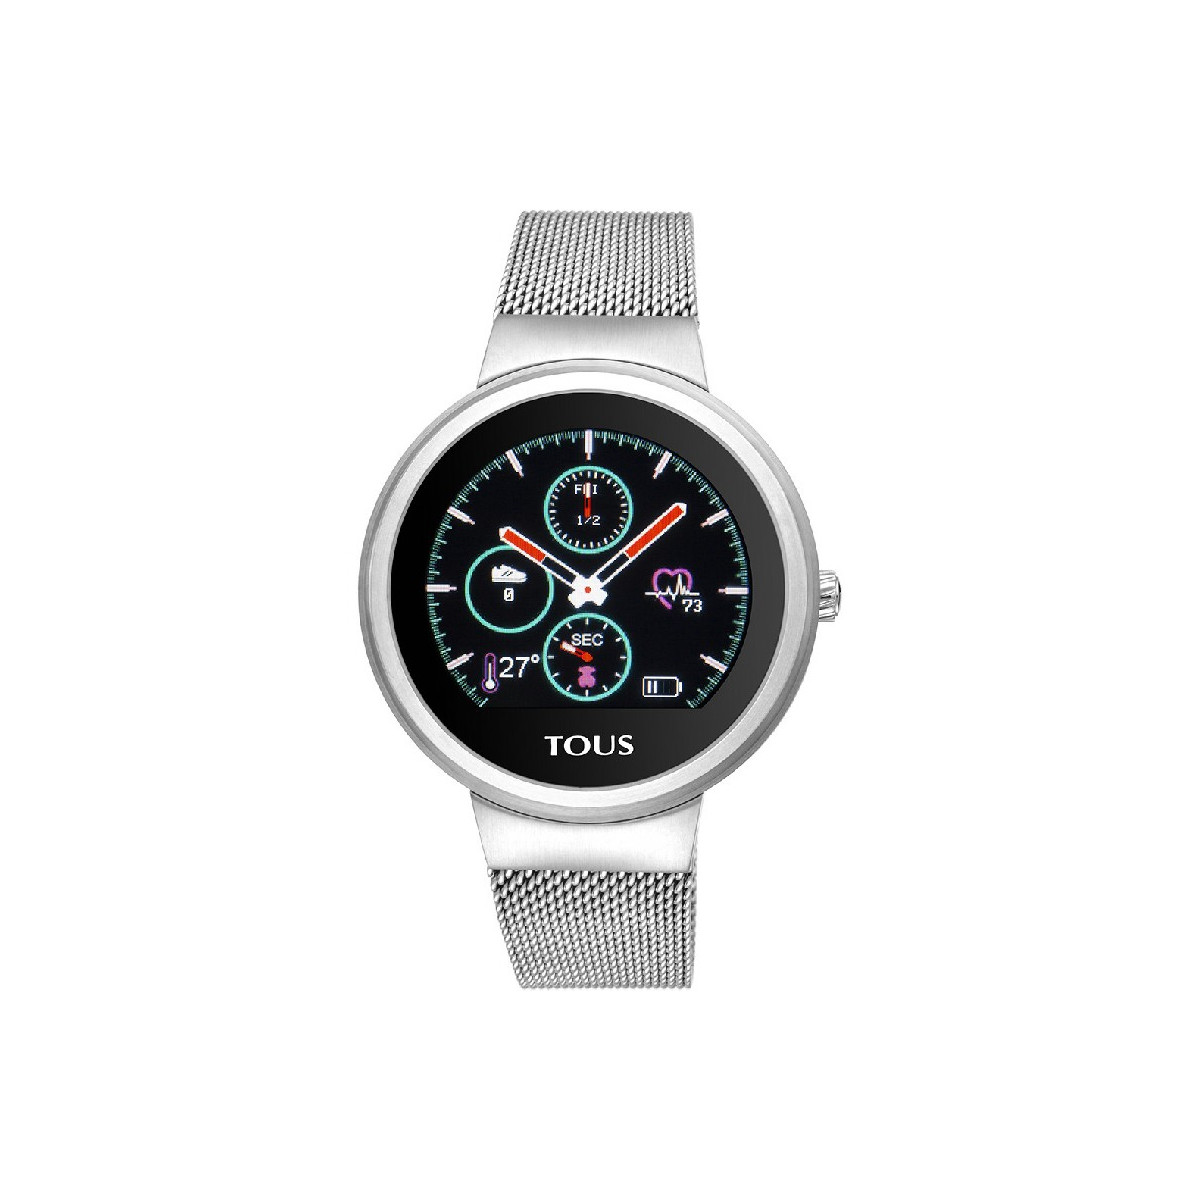 RELLOTGE TOUS TOUCH ACTIVITY WATCH ACER - 000351640